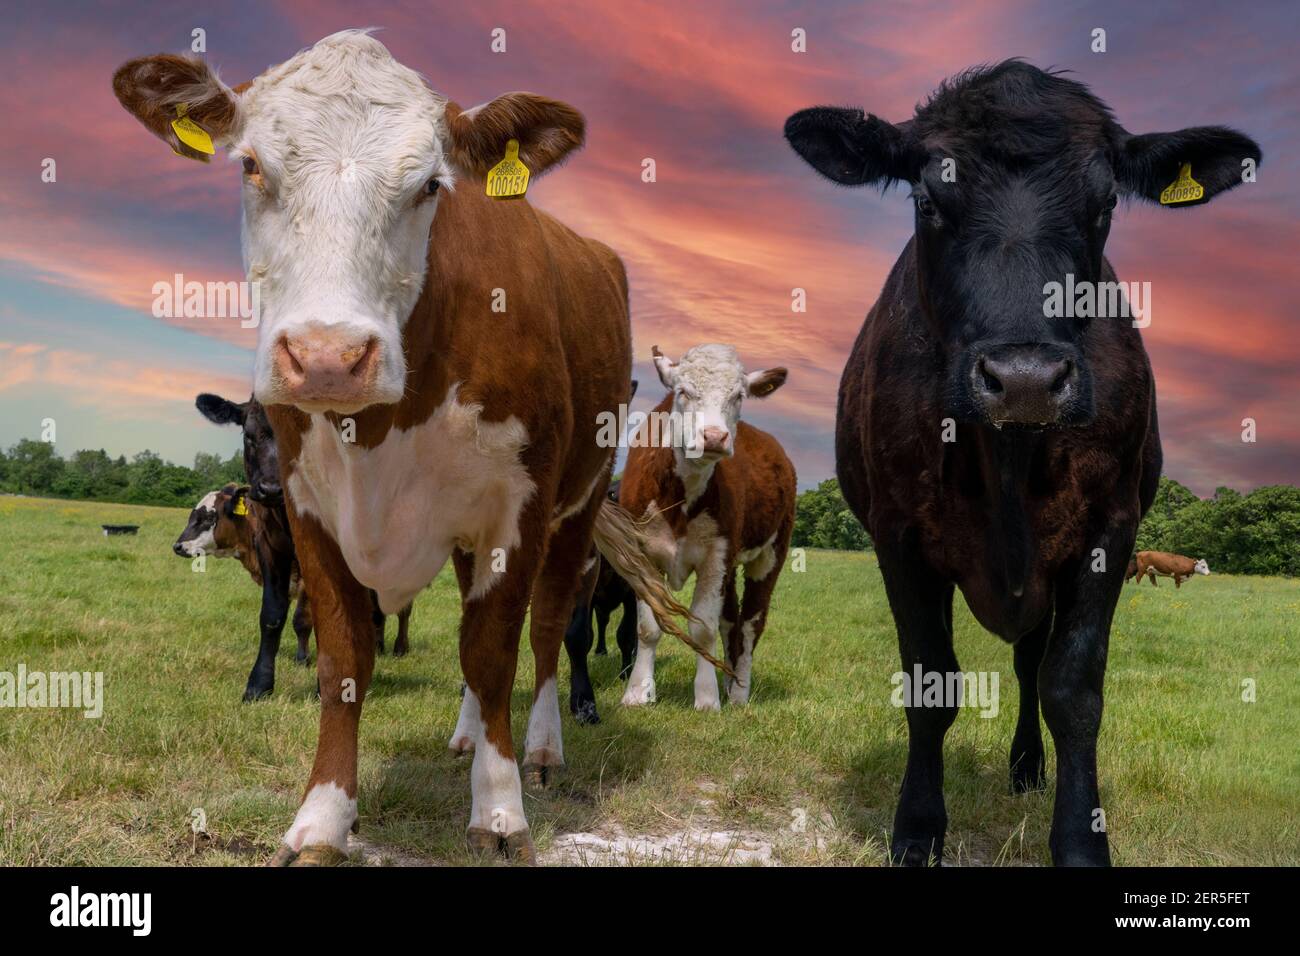 https://c8.alamy.com/comp/2ER5FET/curious-cows-bos-taurus-on-a-farm-in-east-sussex-england-uk-gb-2ER5FET.jpg